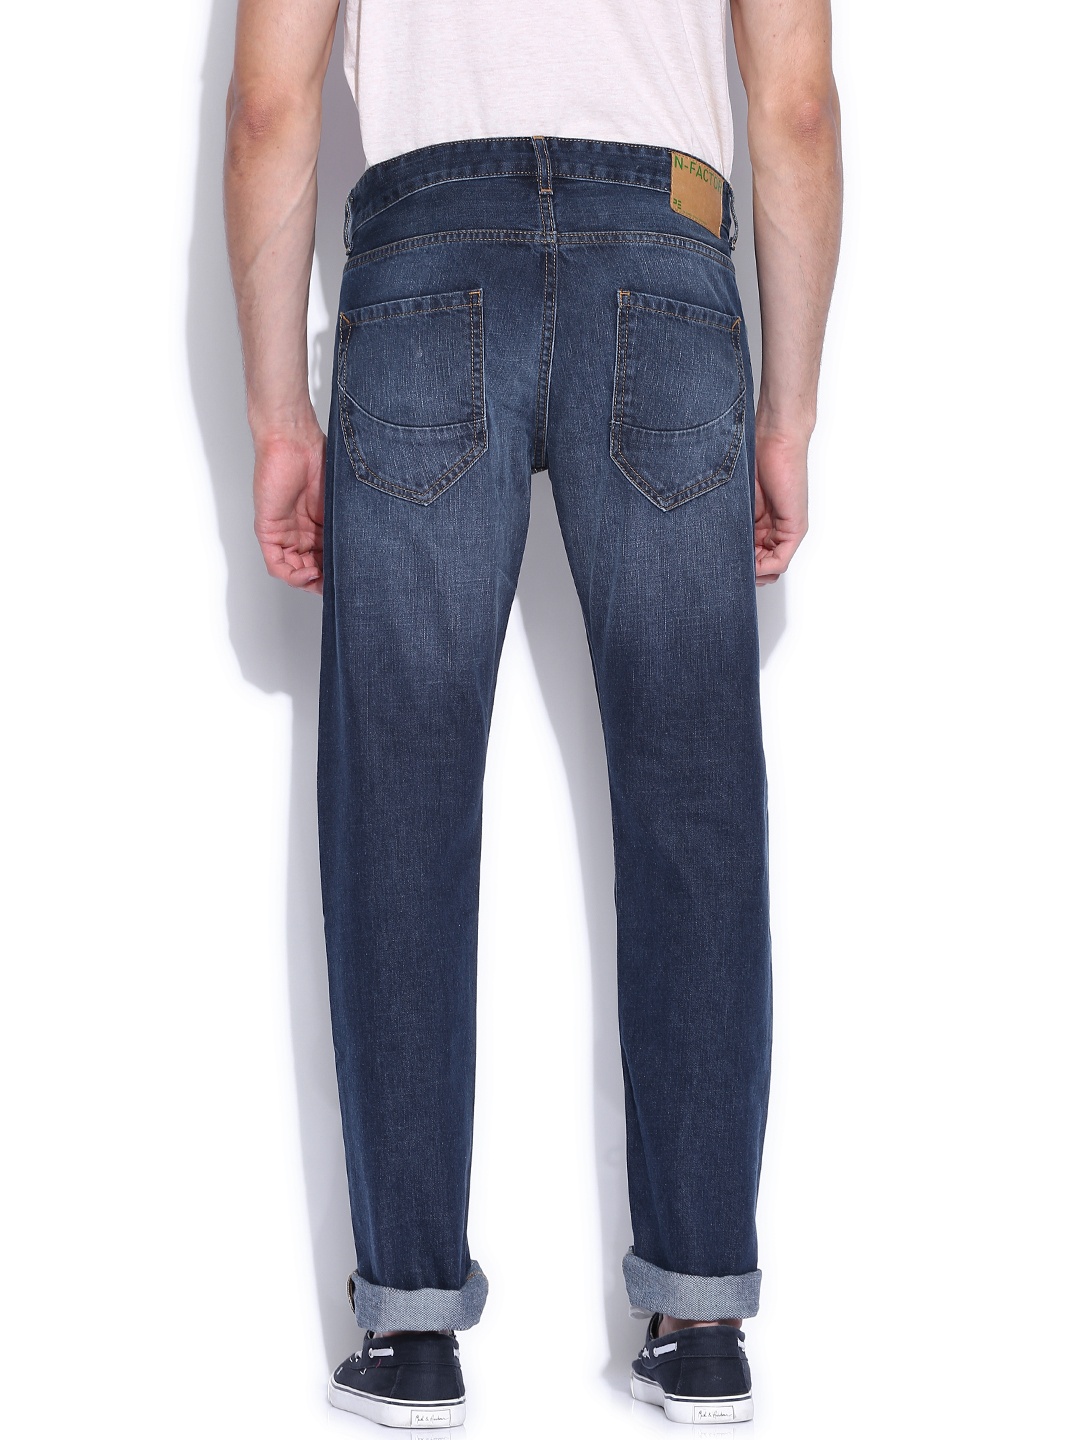 -Rise Slim Straight Fit Jeans 842630 | Buy Myntra Peter England Jeans ...